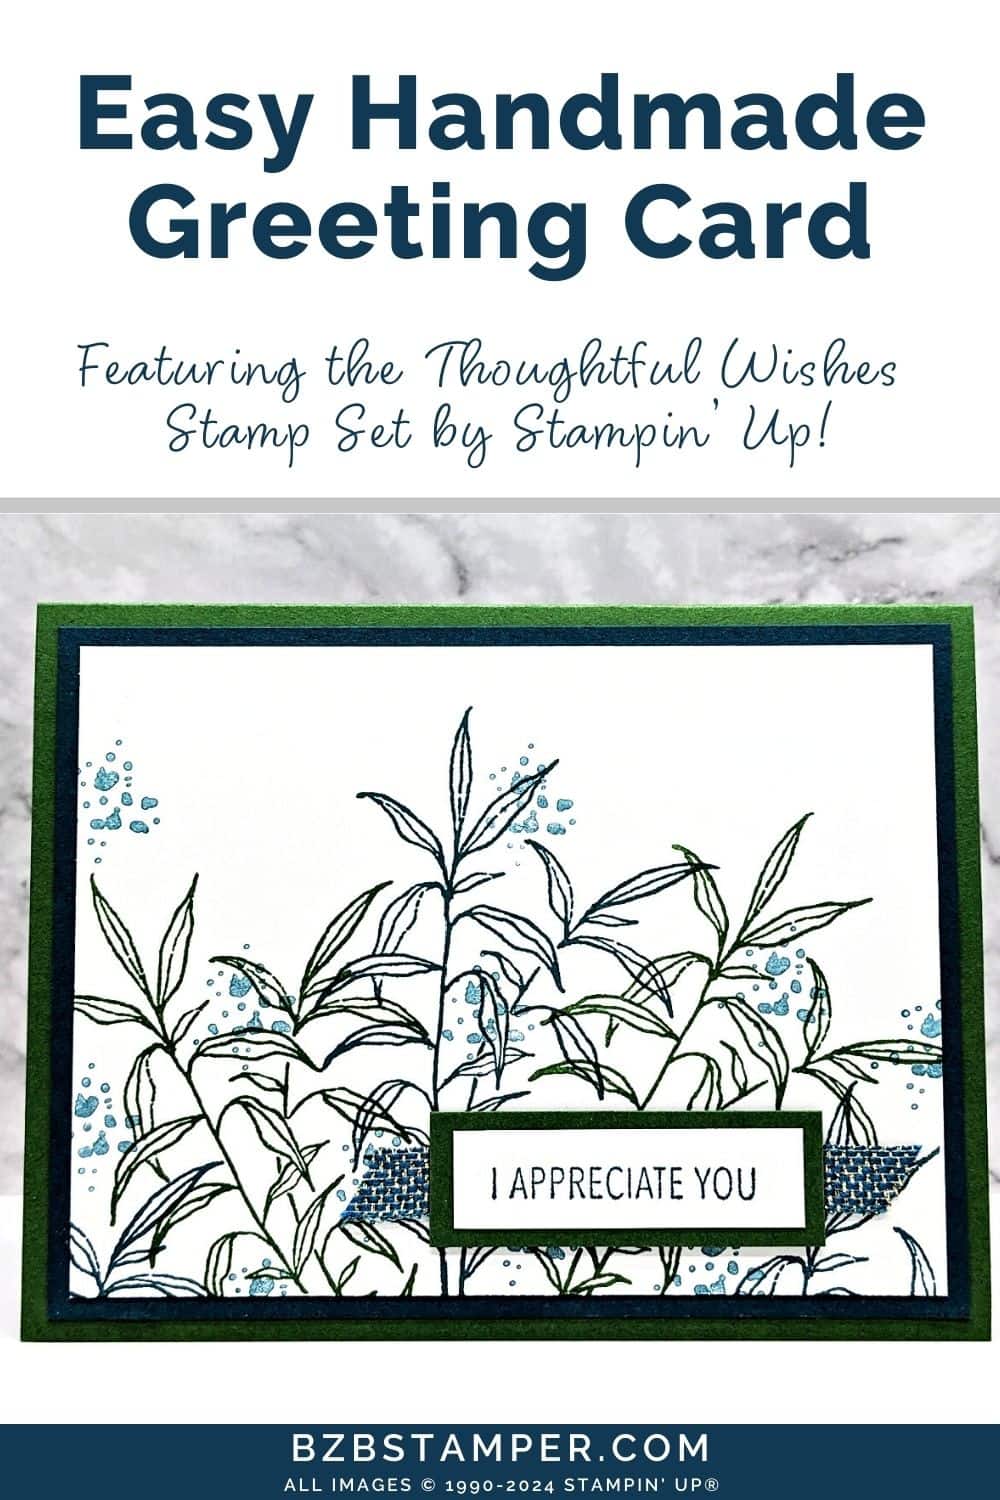 Easy Greeting Cards using the Thoughtful Wishes Stamp Set in Navy Blues and Greens, featuring an "I appreciate you" sentiment.